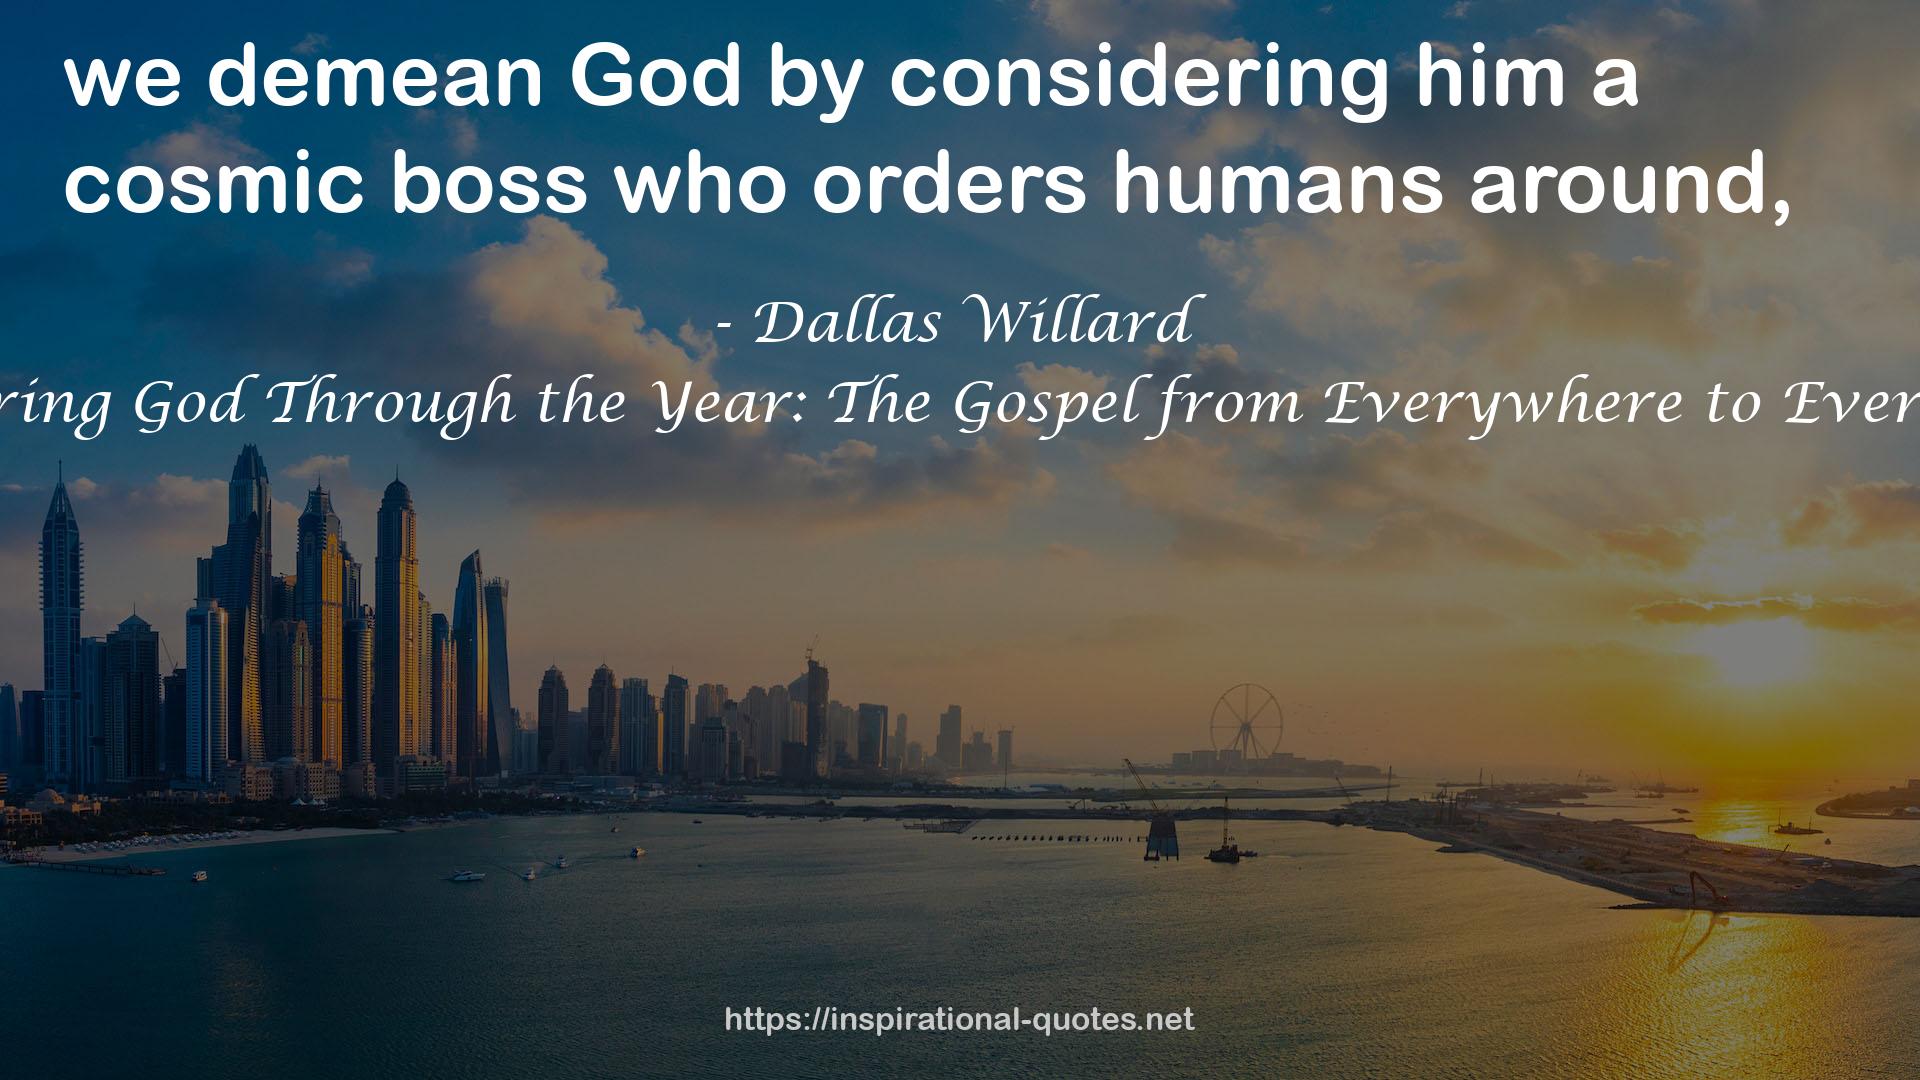 Hearing God Through the Year: The Gospel from Everywhere to Everyone QUOTES